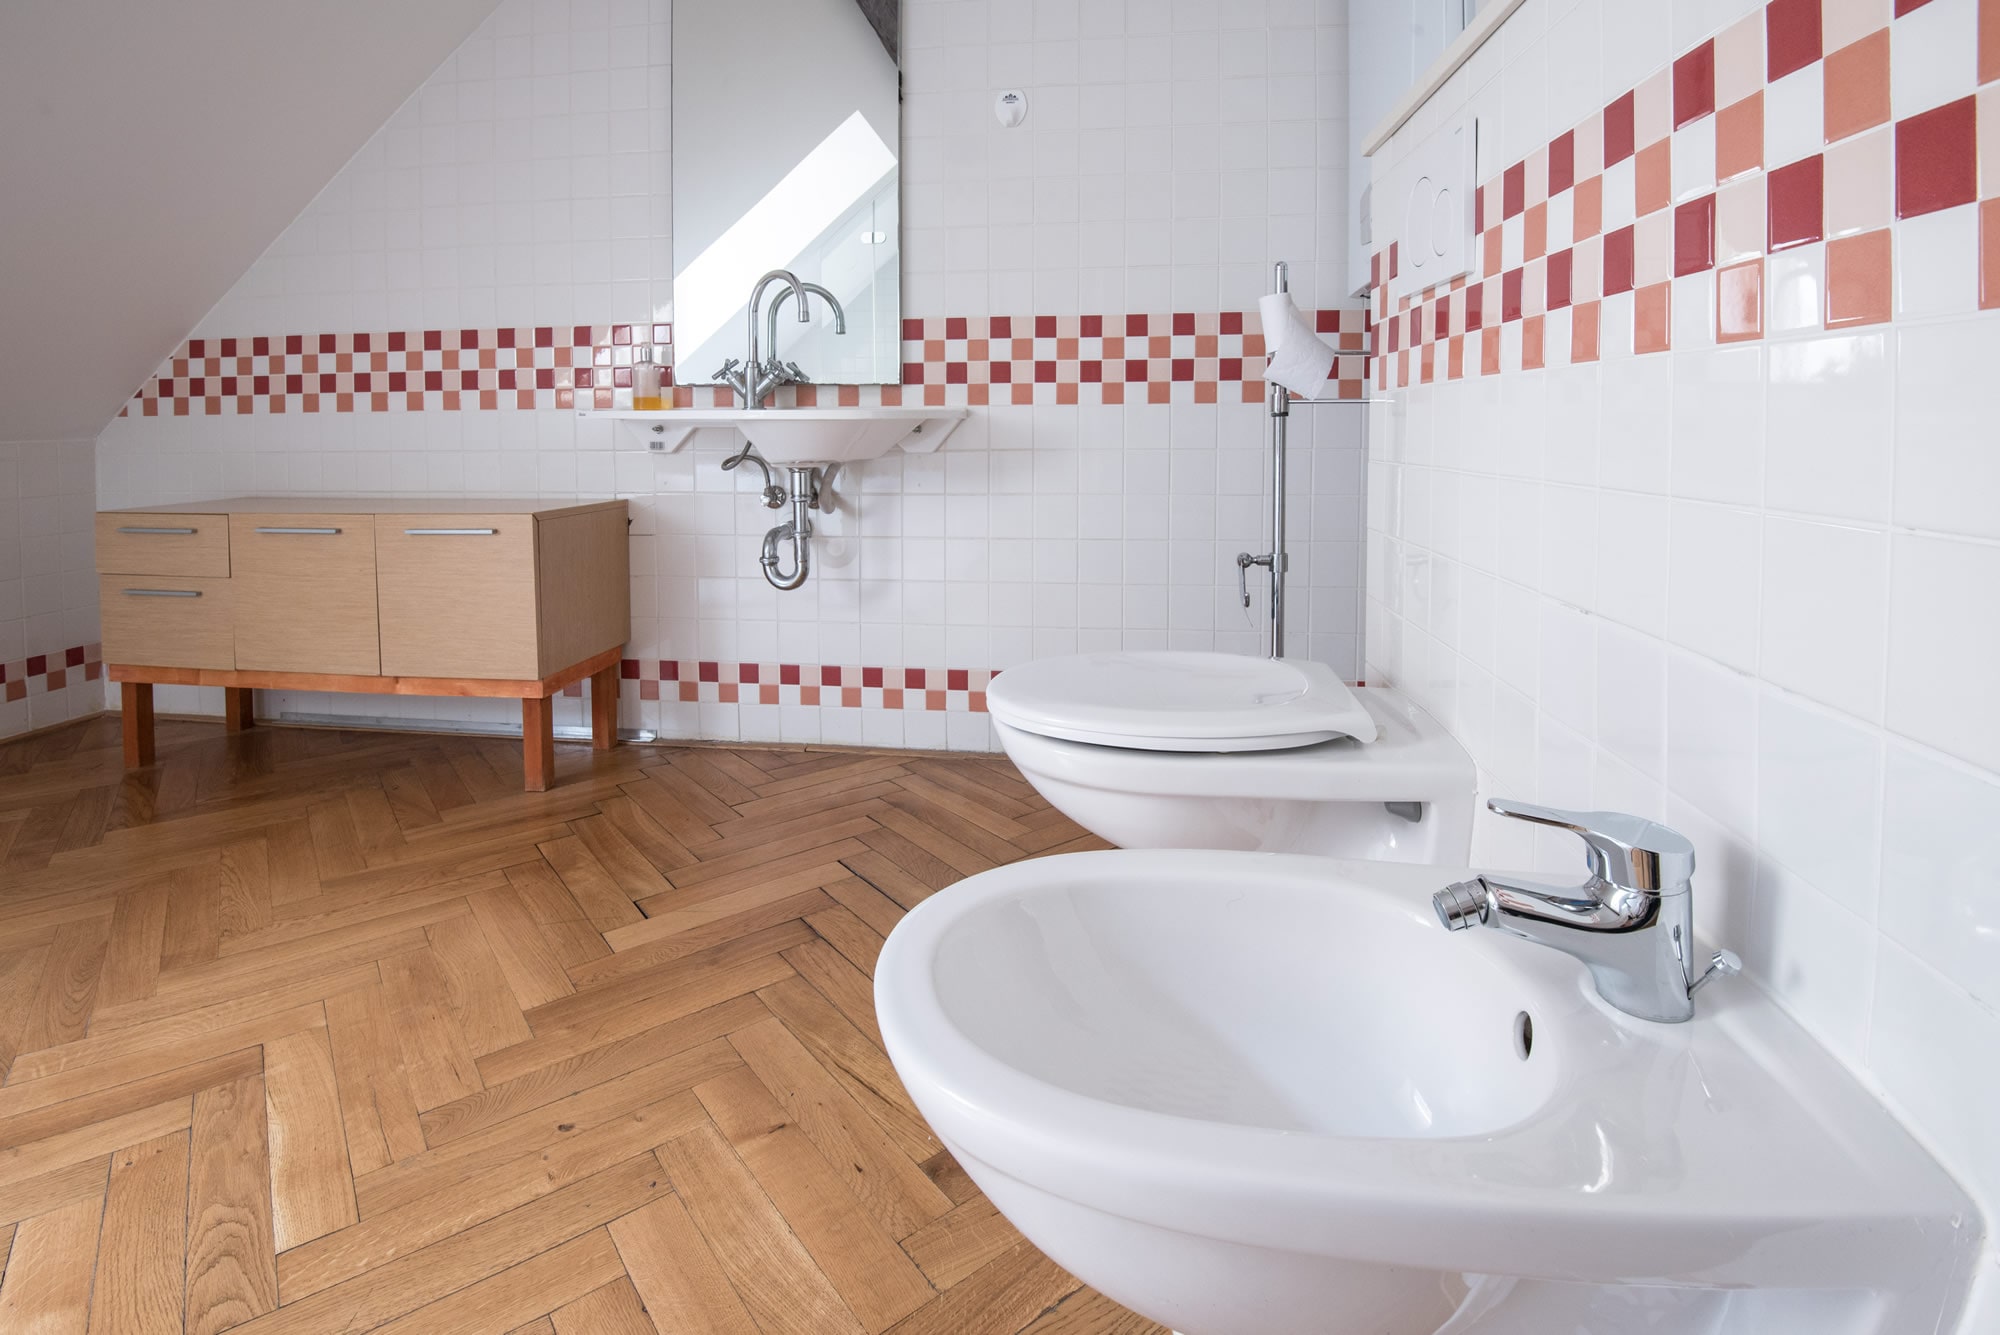 Large bathroom covered by white tiles and wooden parquet.